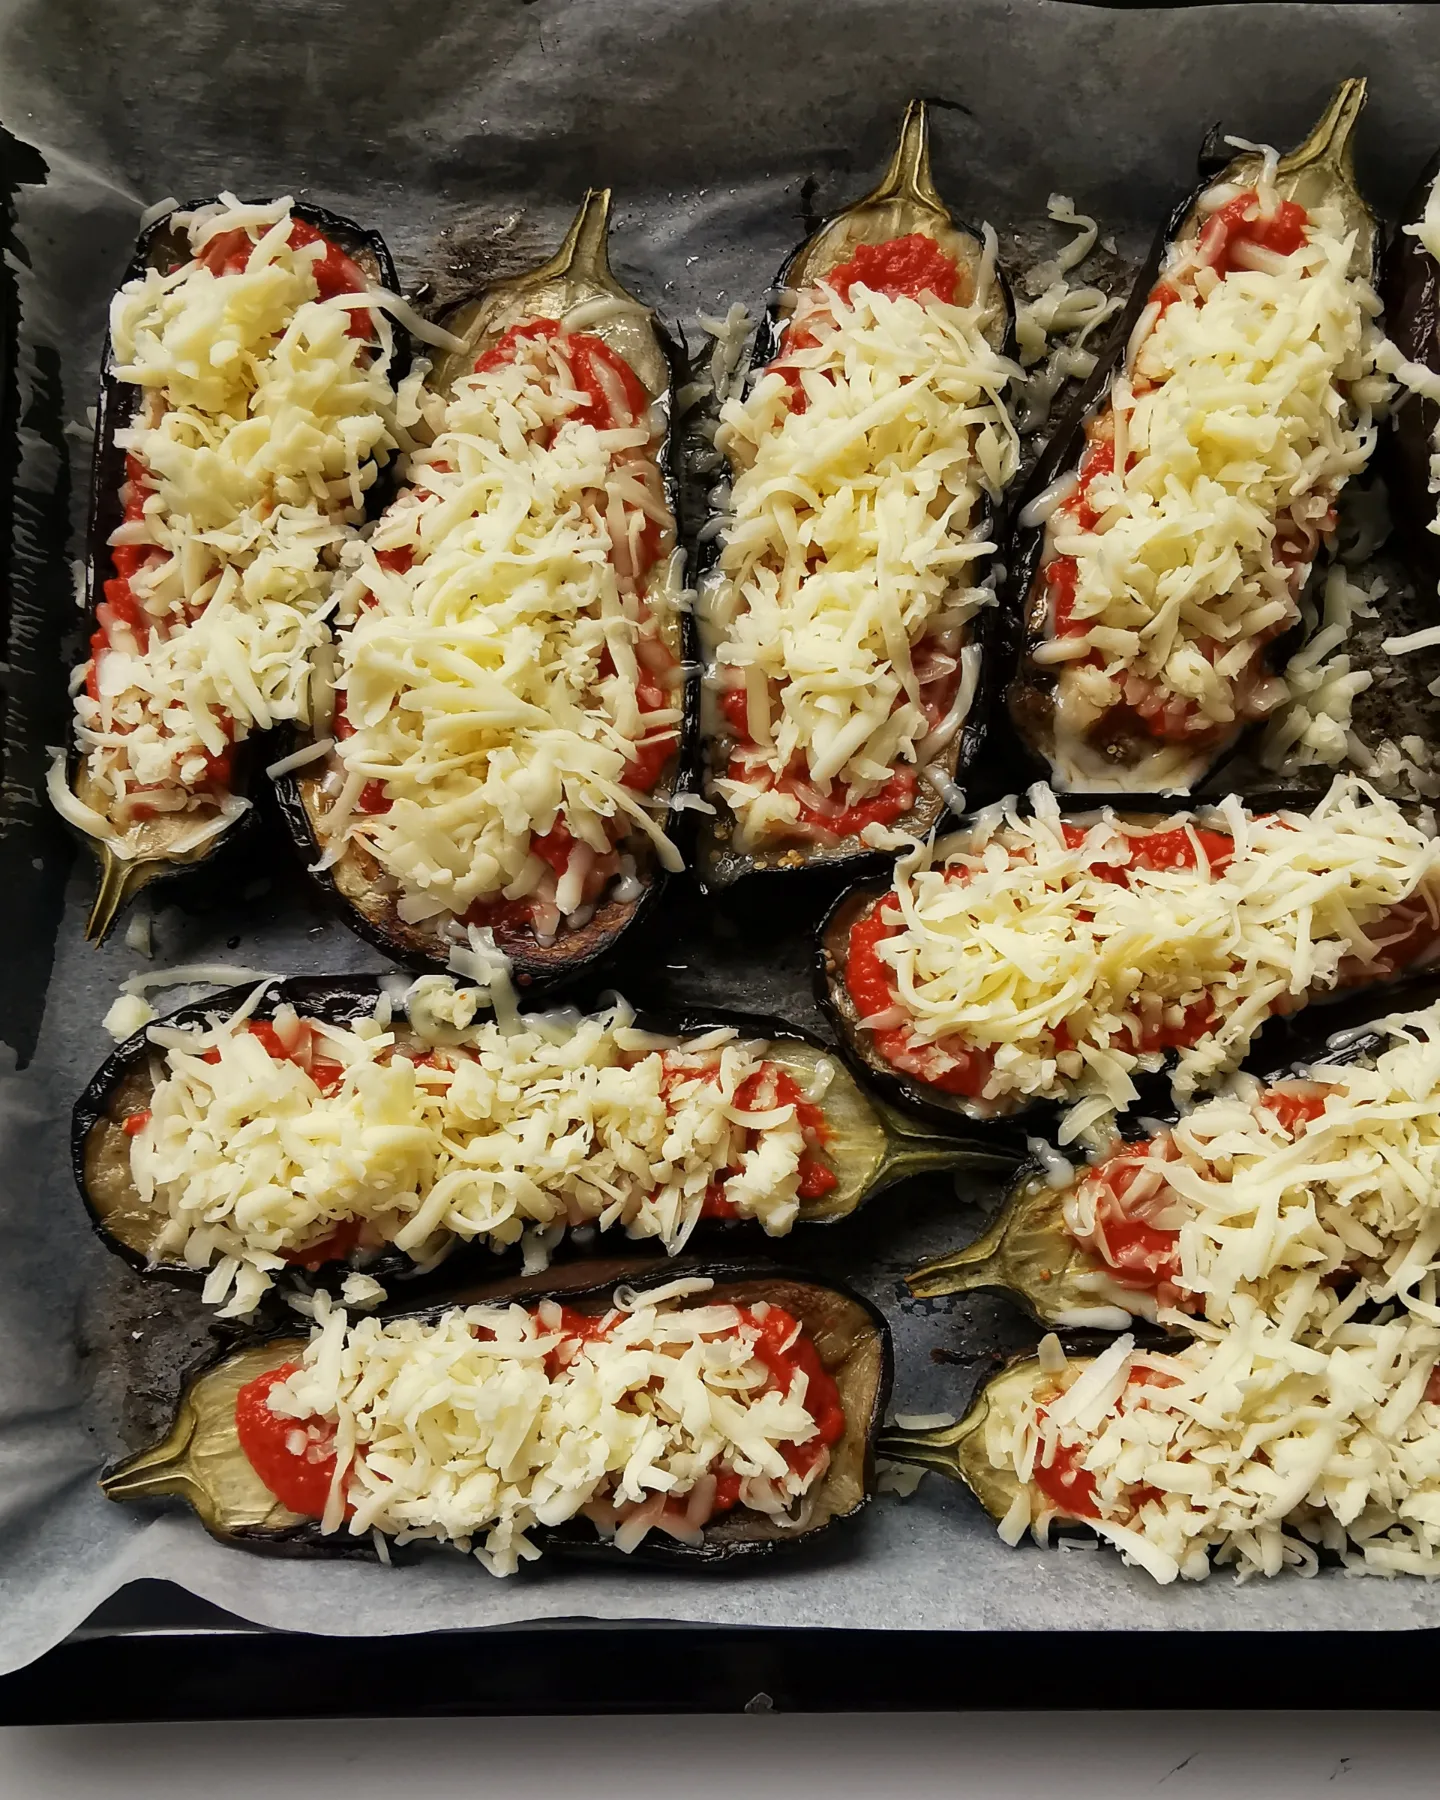 Roasted cheesy eggplants with red pepper sauce